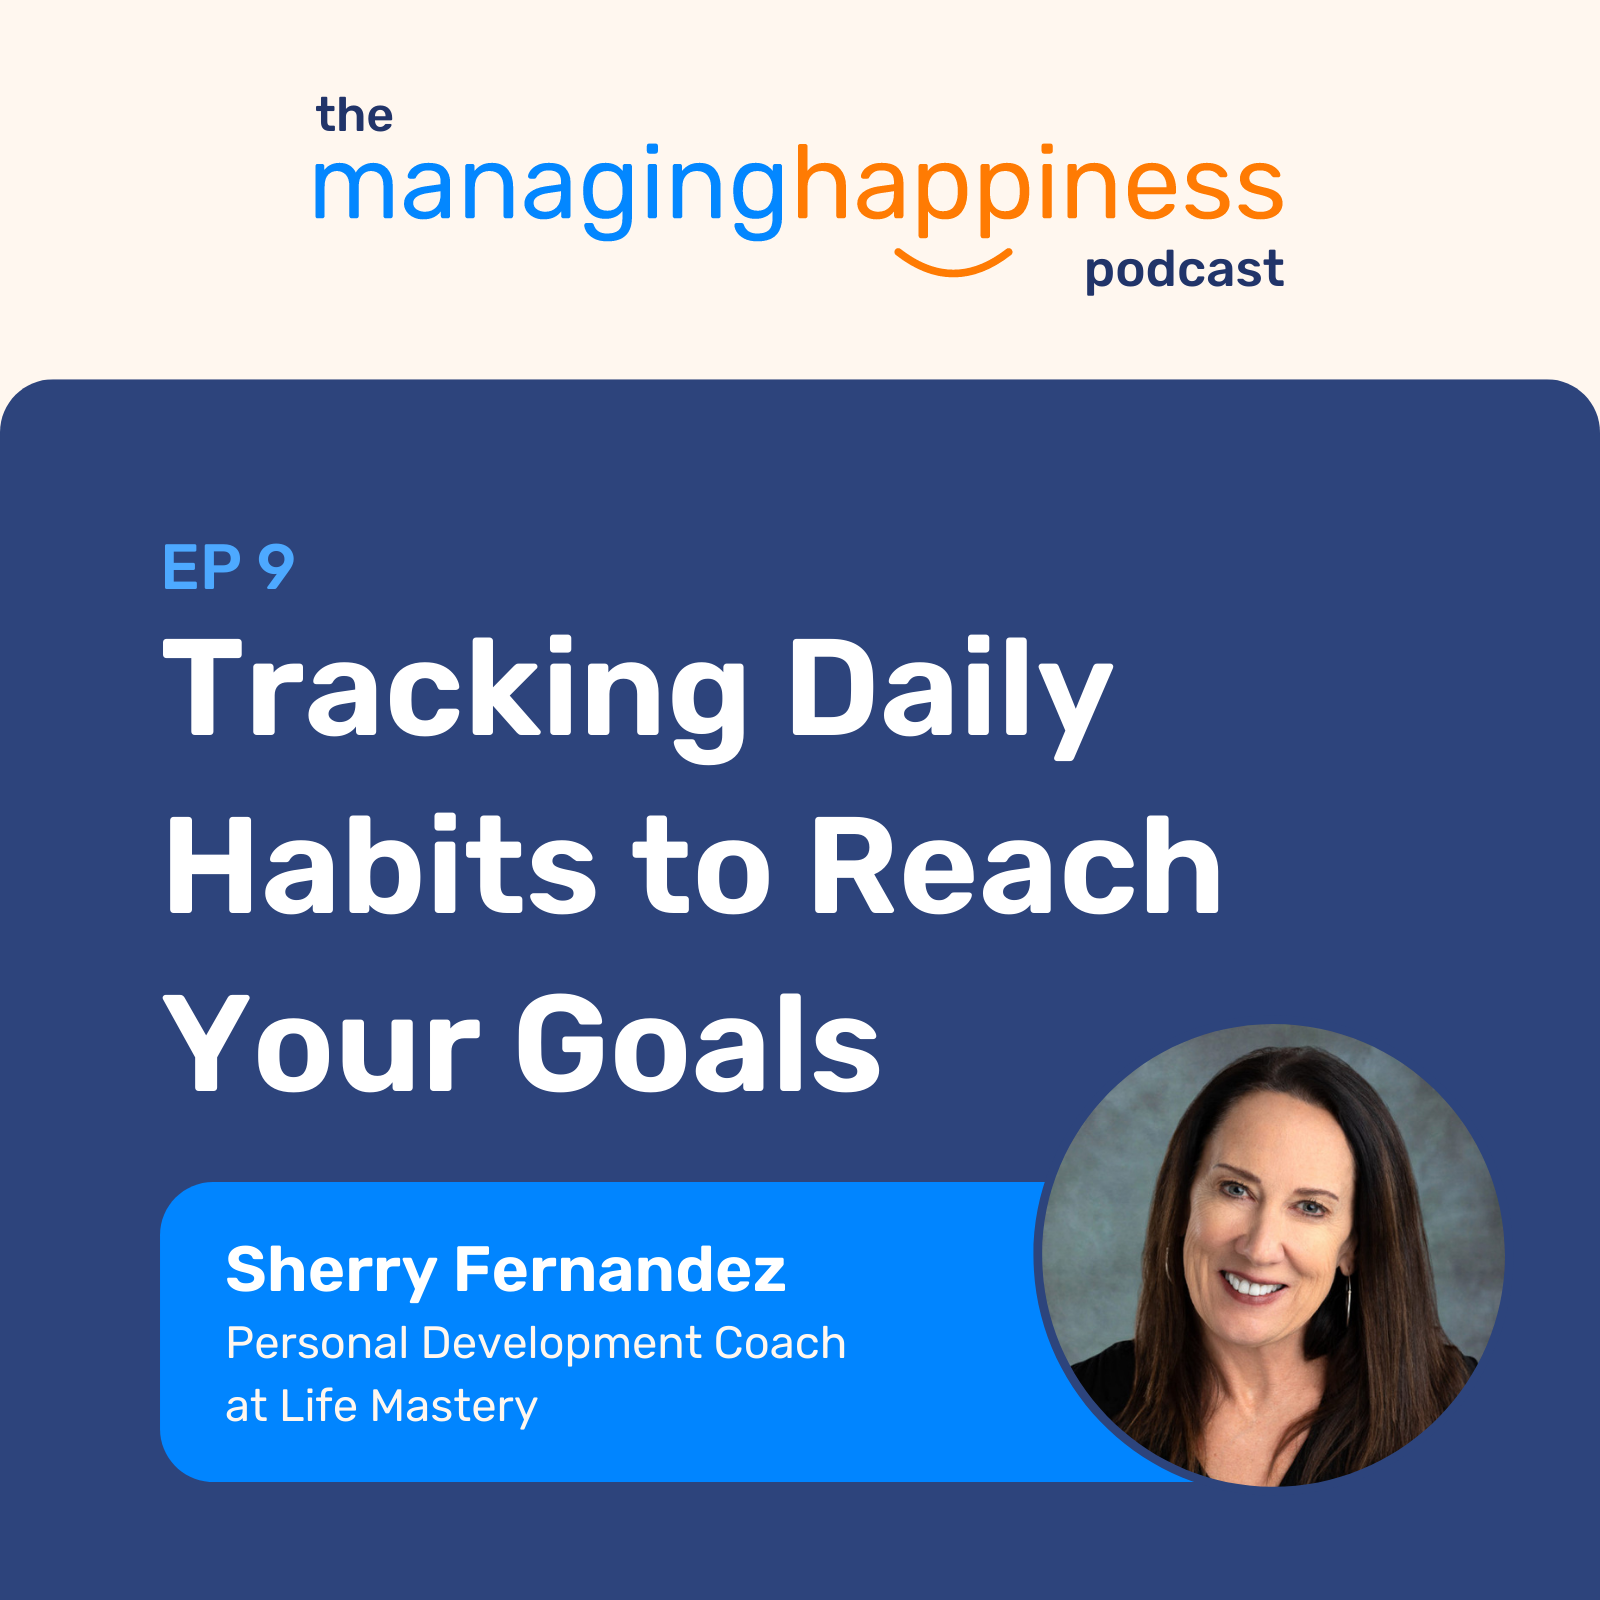 Tracking Daily Habits to Reach Your Goals” with Sherry Fernandez